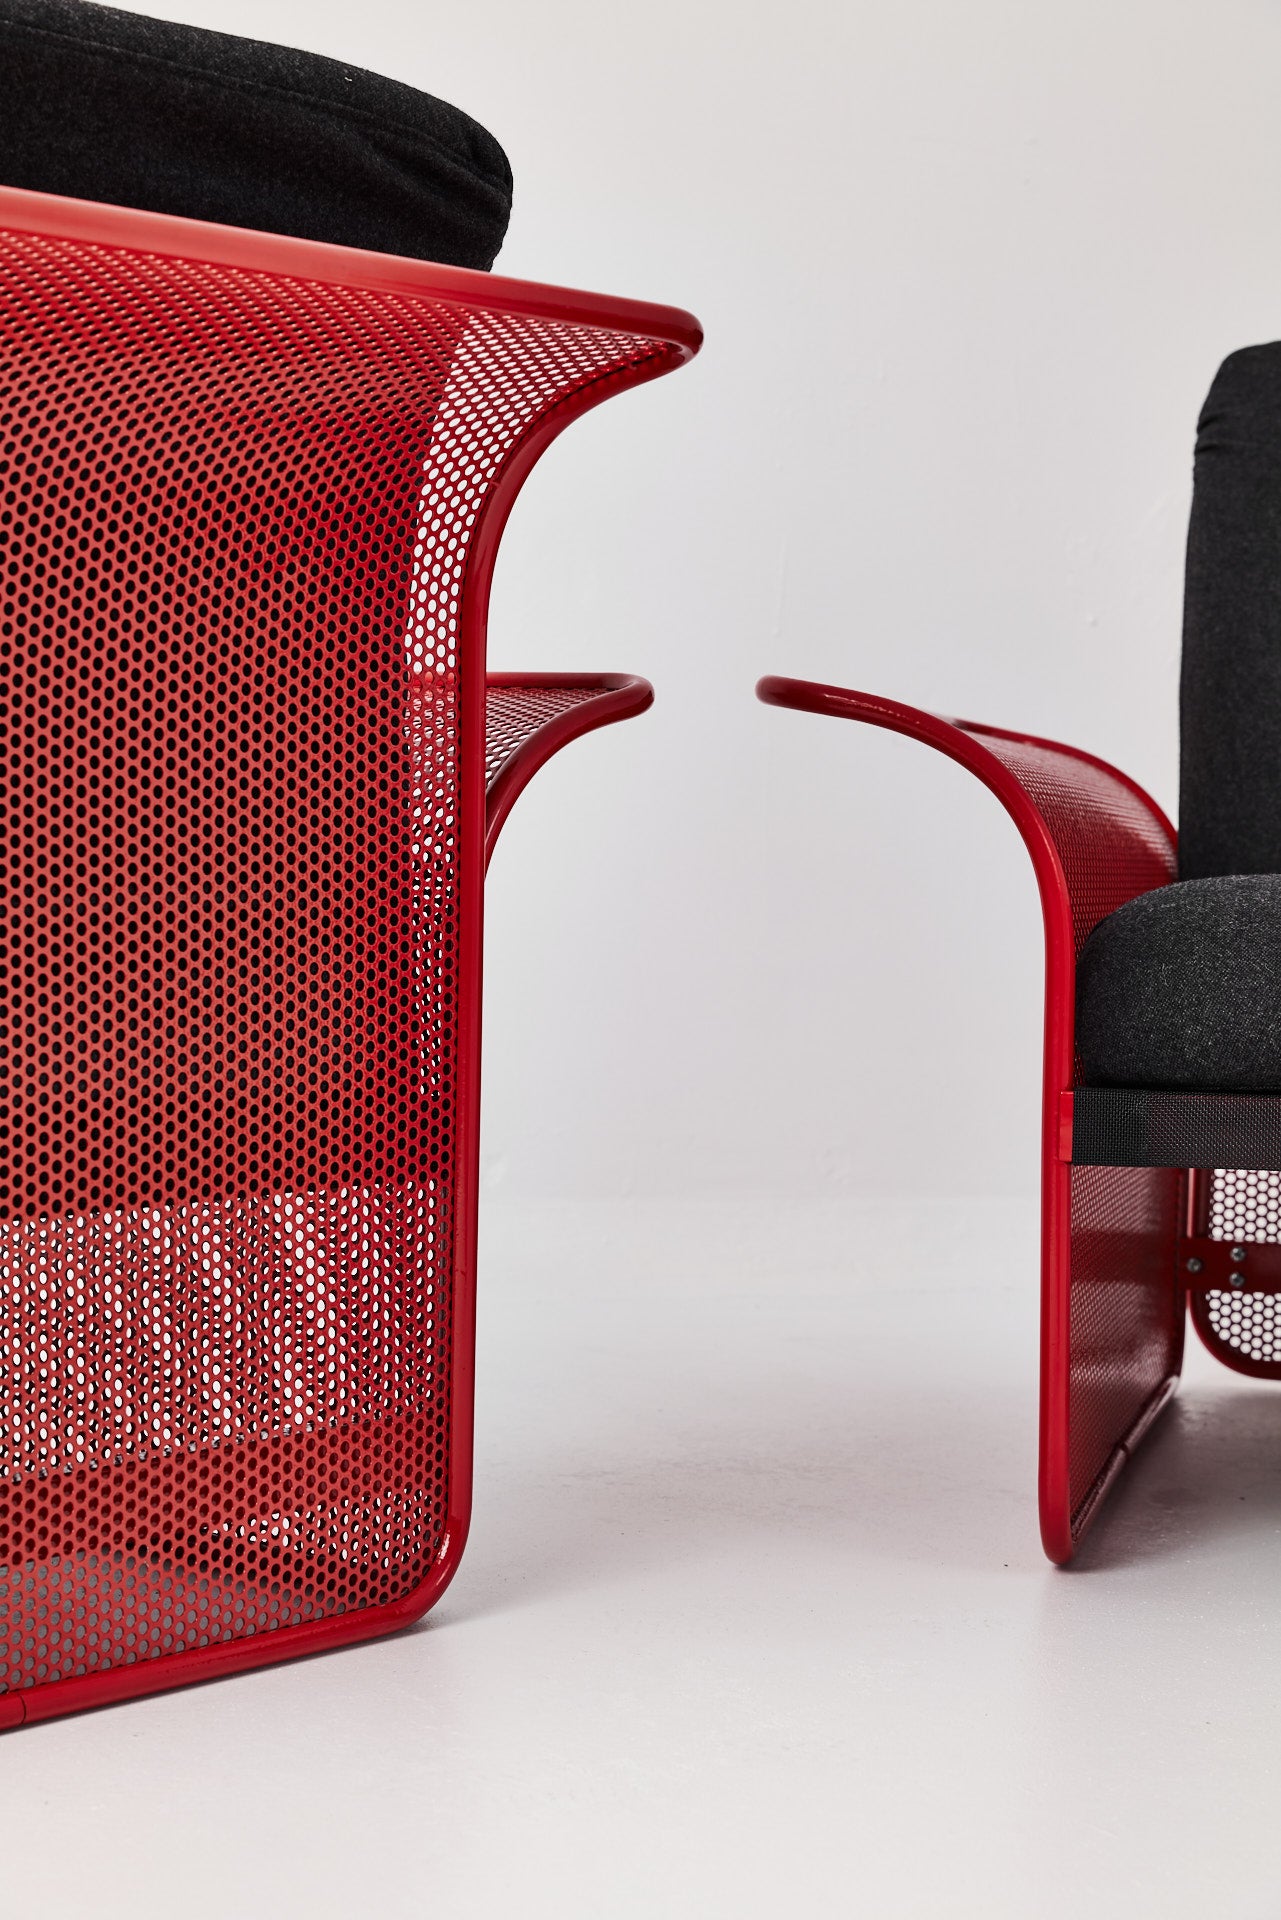 Restored Red perforated steel lounge chair - One available